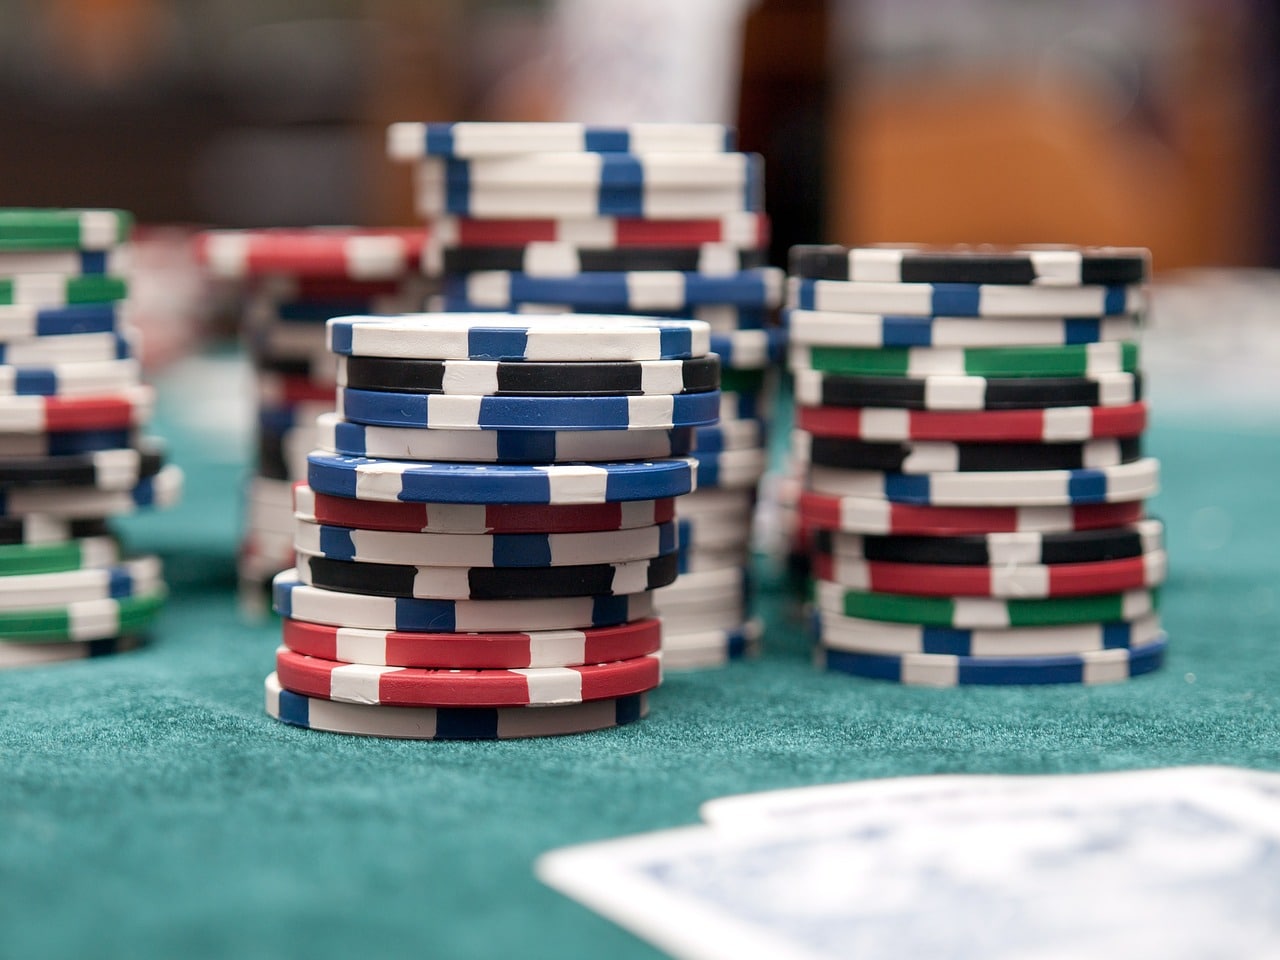 7 Rules About more live casino sites Meant To Be Broken